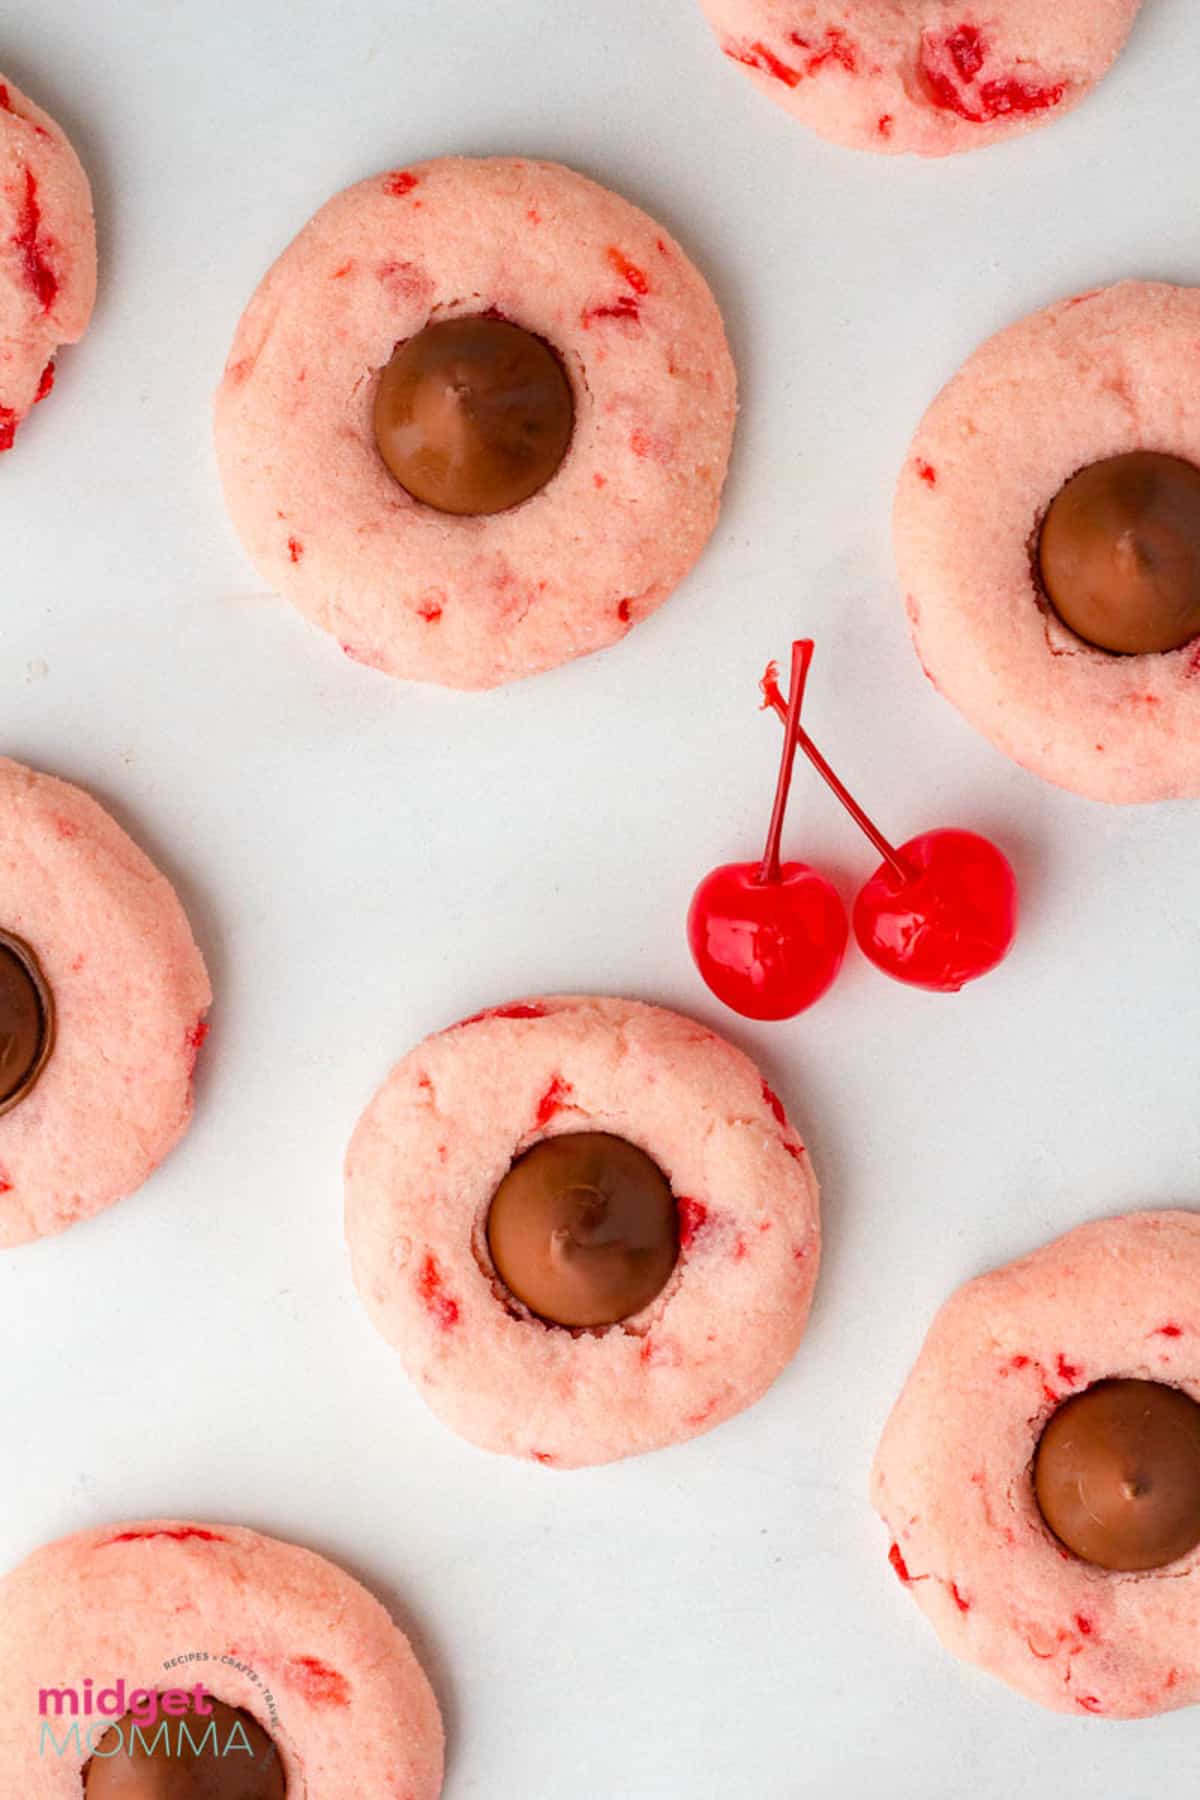 Cherry cookies with chocolate chips and cherries on a white surface.